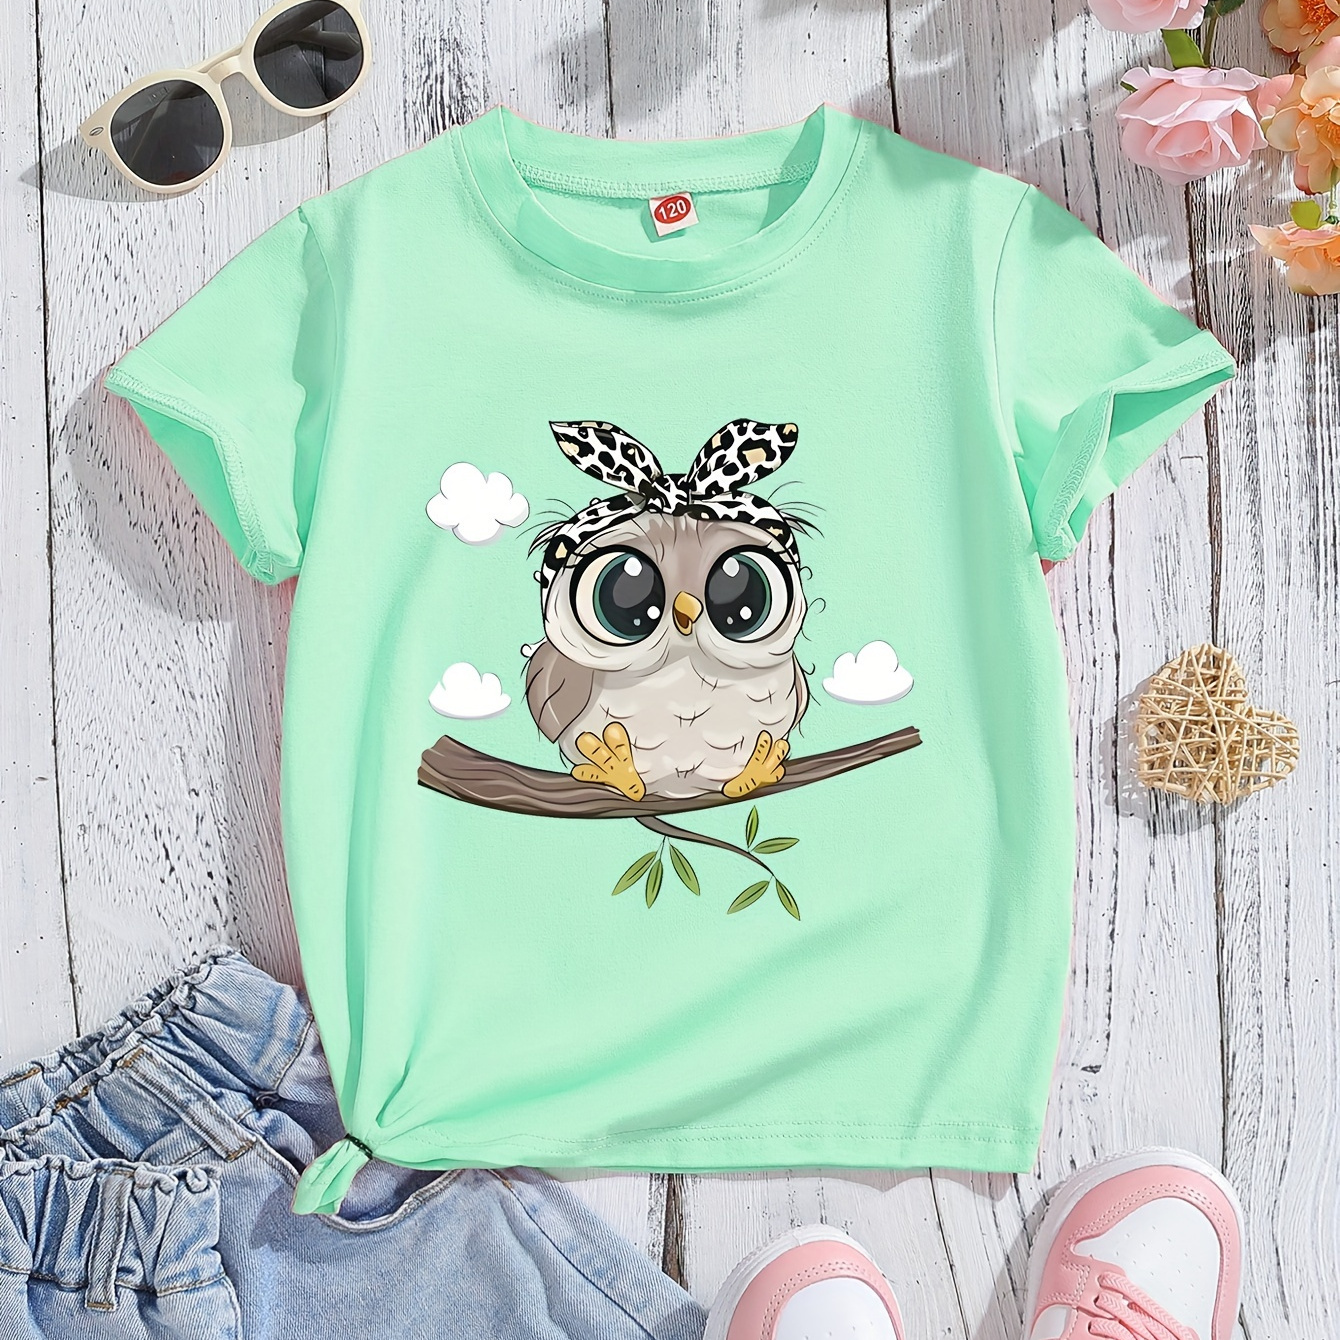 

Cute Cartoon Owl On Branch Graphic Print, Girls' Stylish Casual Crew Neck Short Sleeve Cotton T-shirt For Spring And Summer For Outdoor Activities, Girls' Clothes